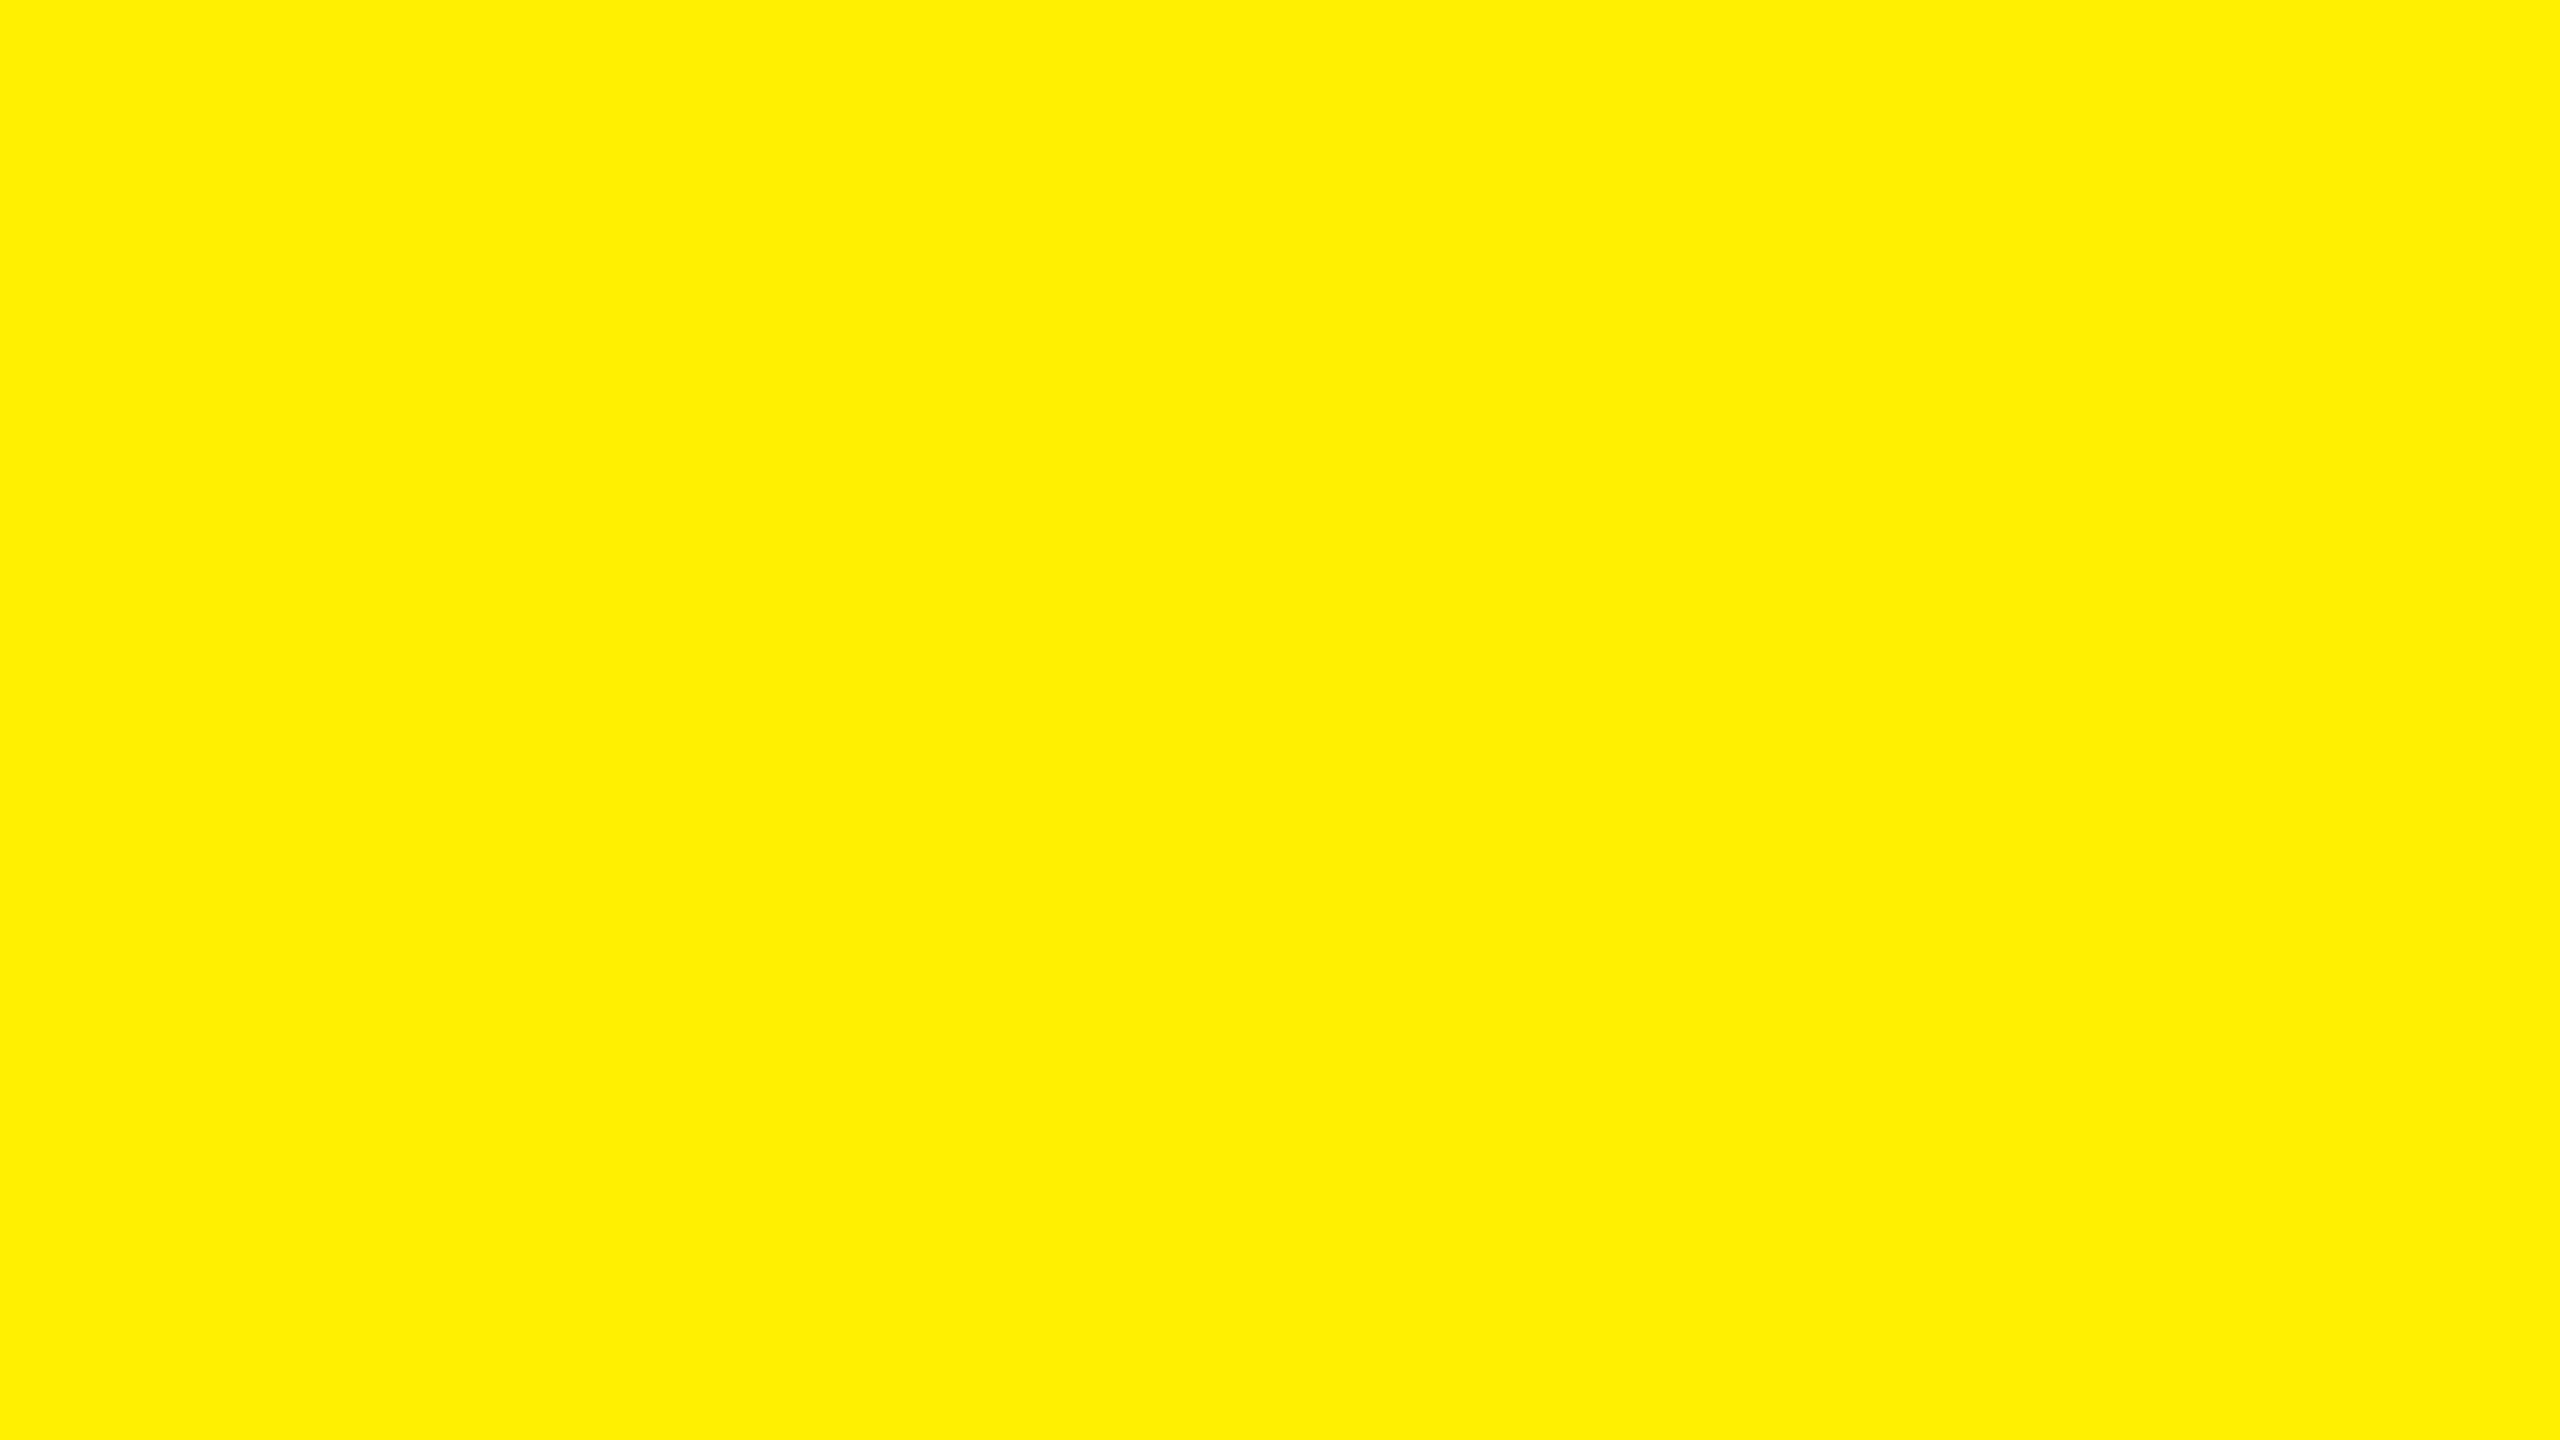 aesthetic tumblr Solid Canary Yellow 2560x1440 Background Color